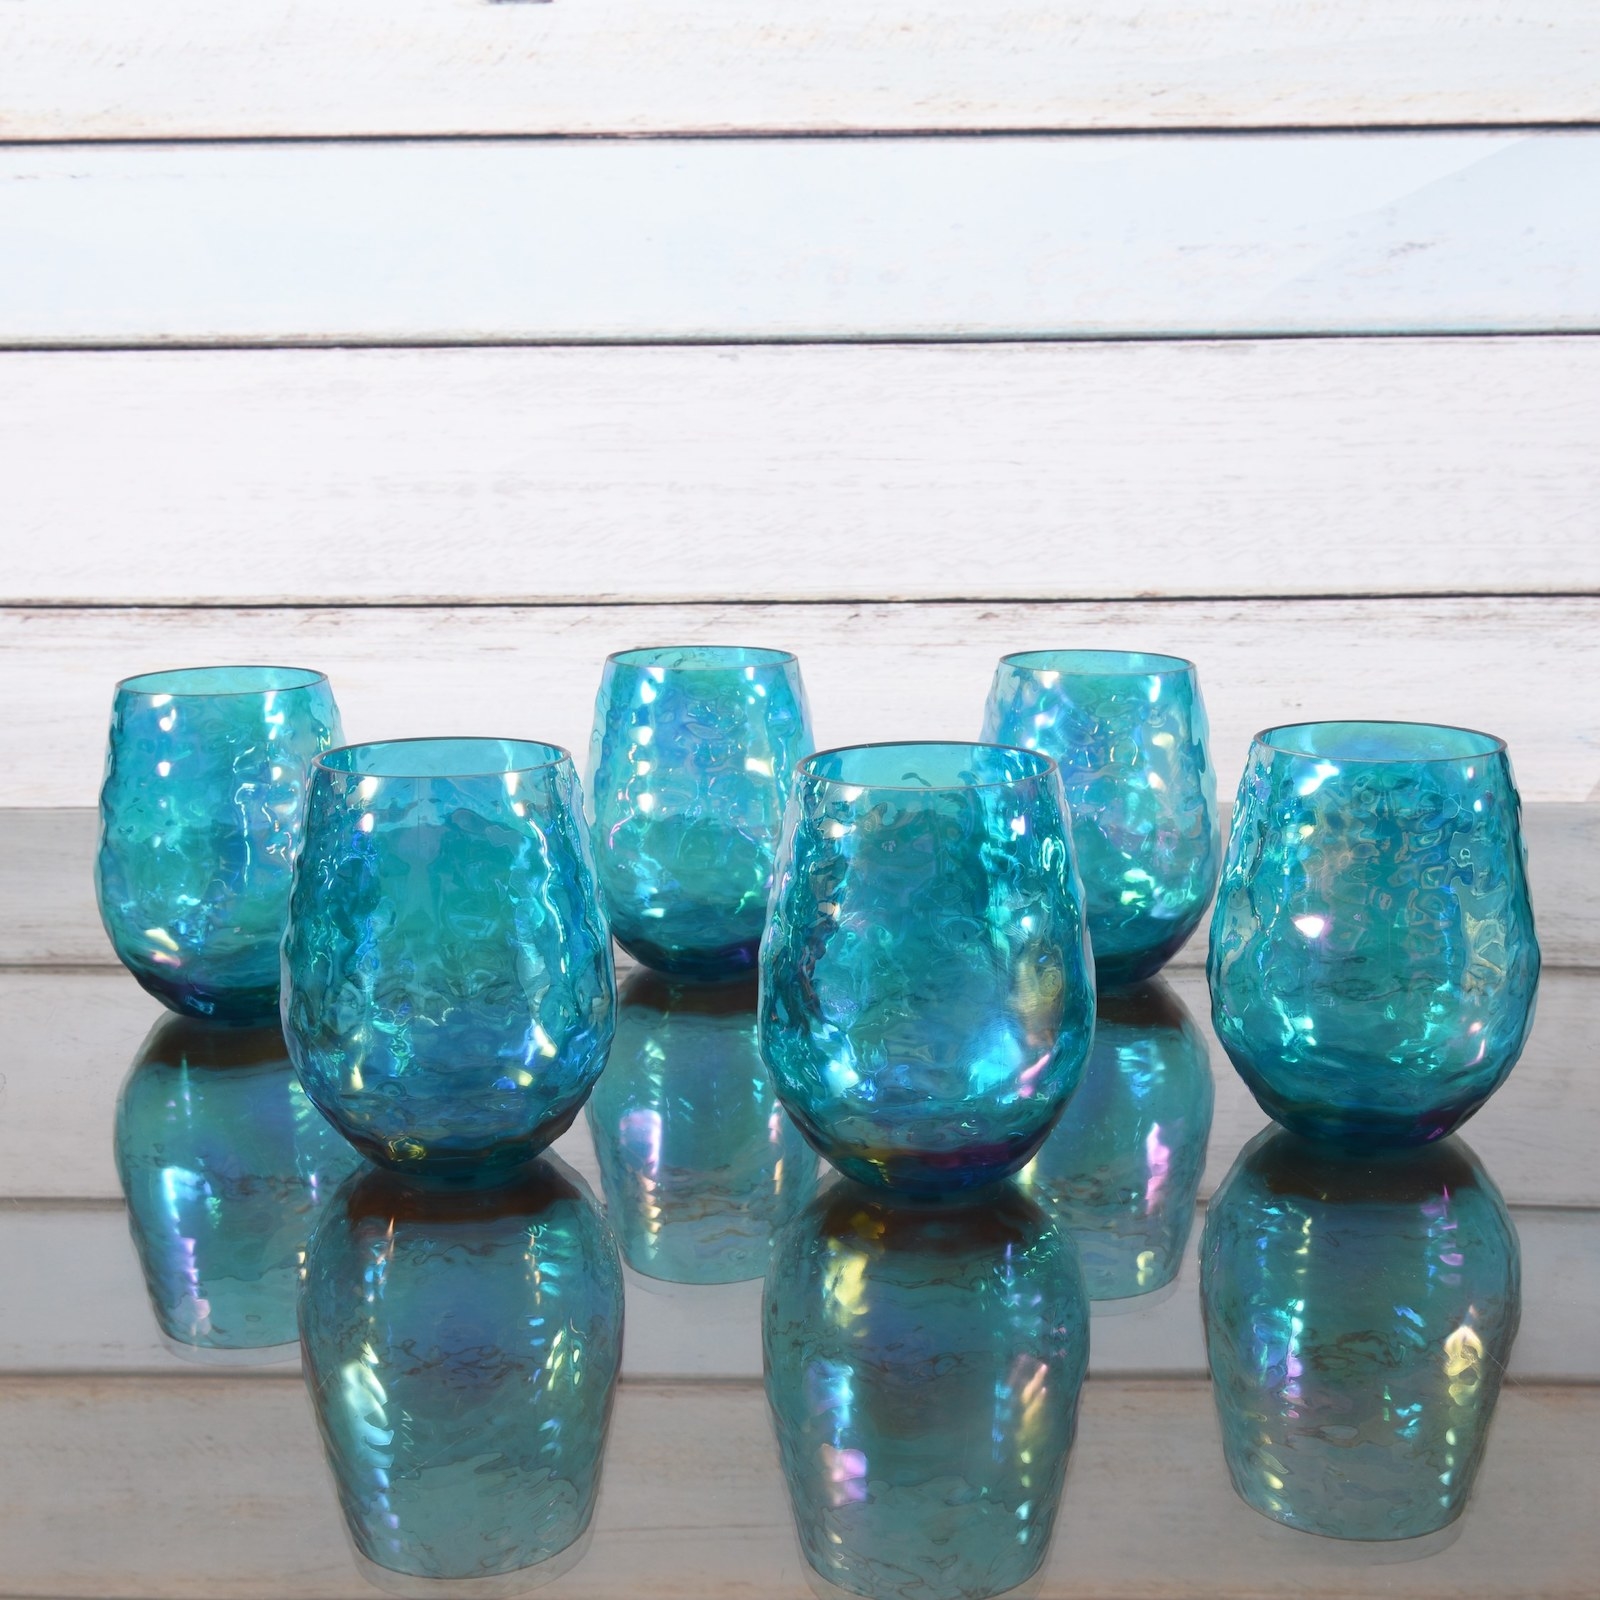 The set of six stemless blue glasses on a table